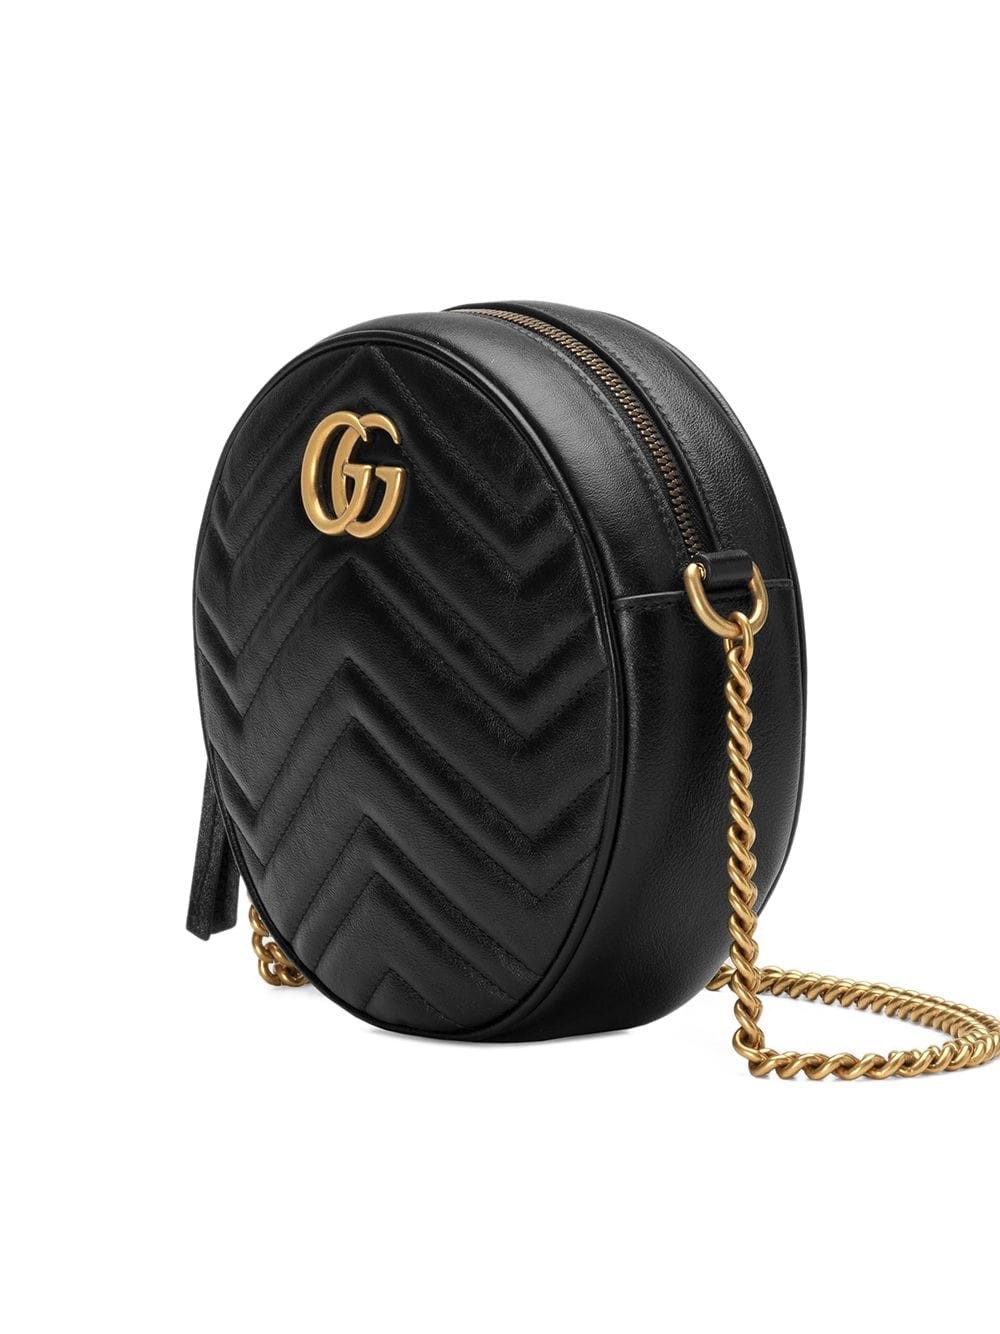 gucci GG MARMONT ROUND BAG available on www.paulmartinsmith.com - 27417